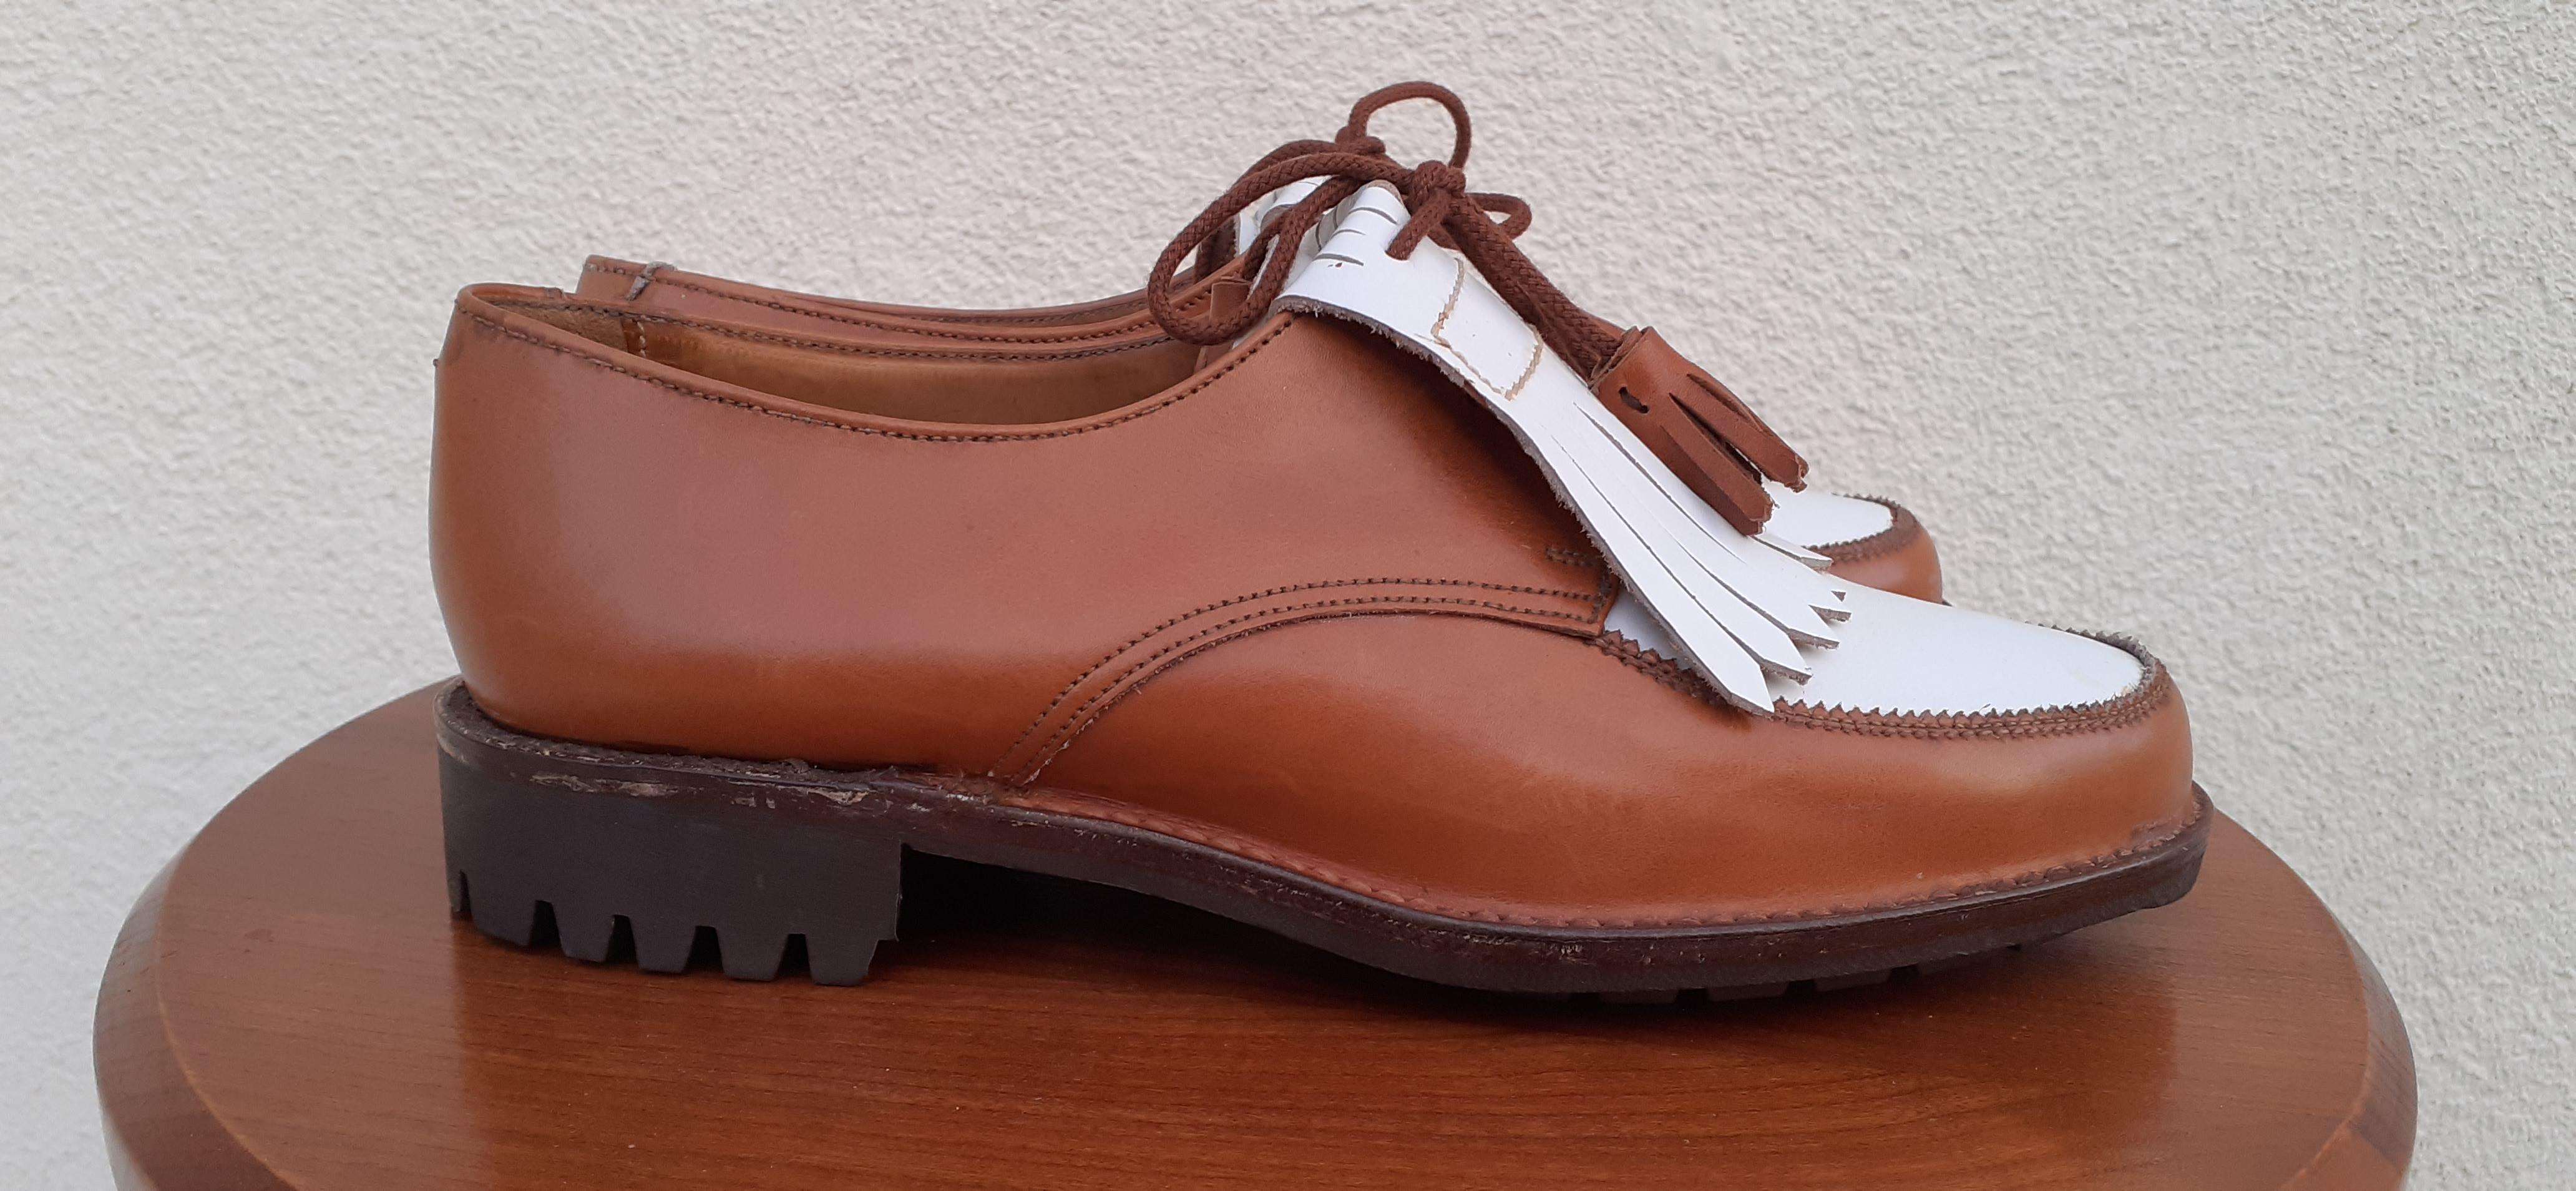 Exceptional Hermès Derbies Golf Shoes Gold and White Leather For Sale 5